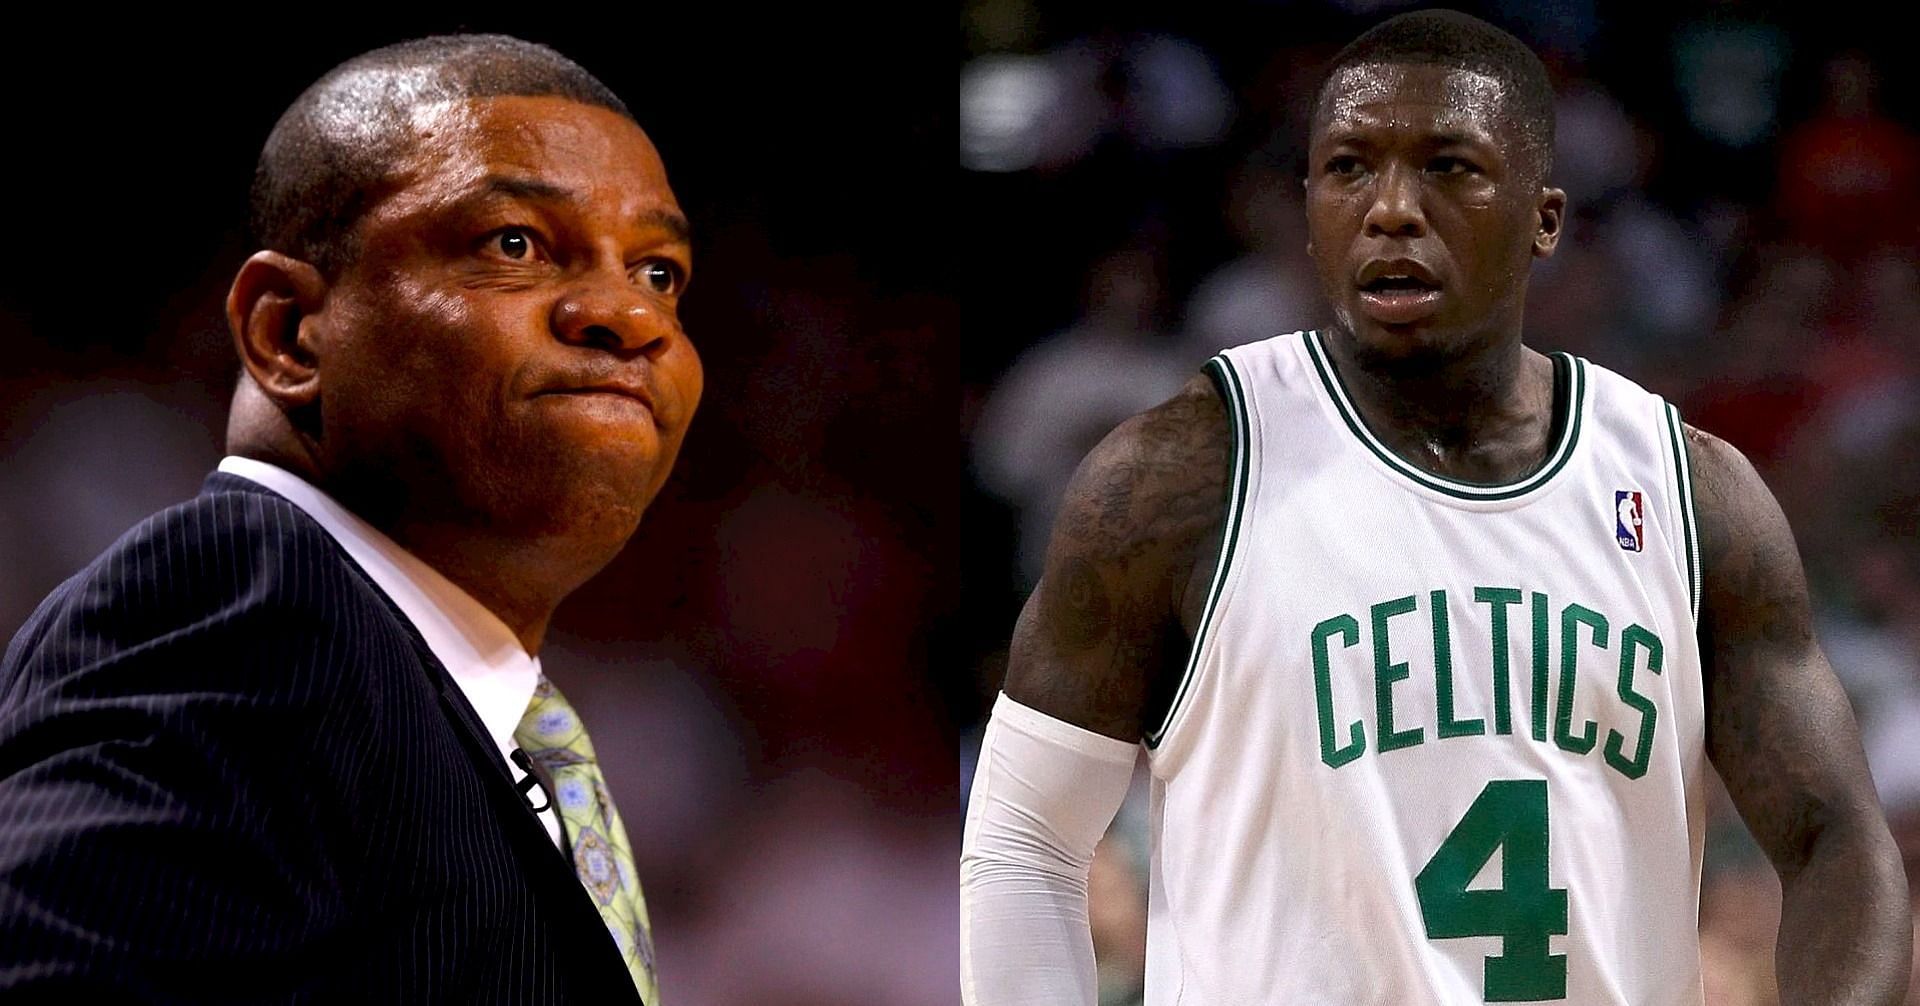 3x NBA Slam Dunk champion points finger at Doc Rivers for losing $1.5 million